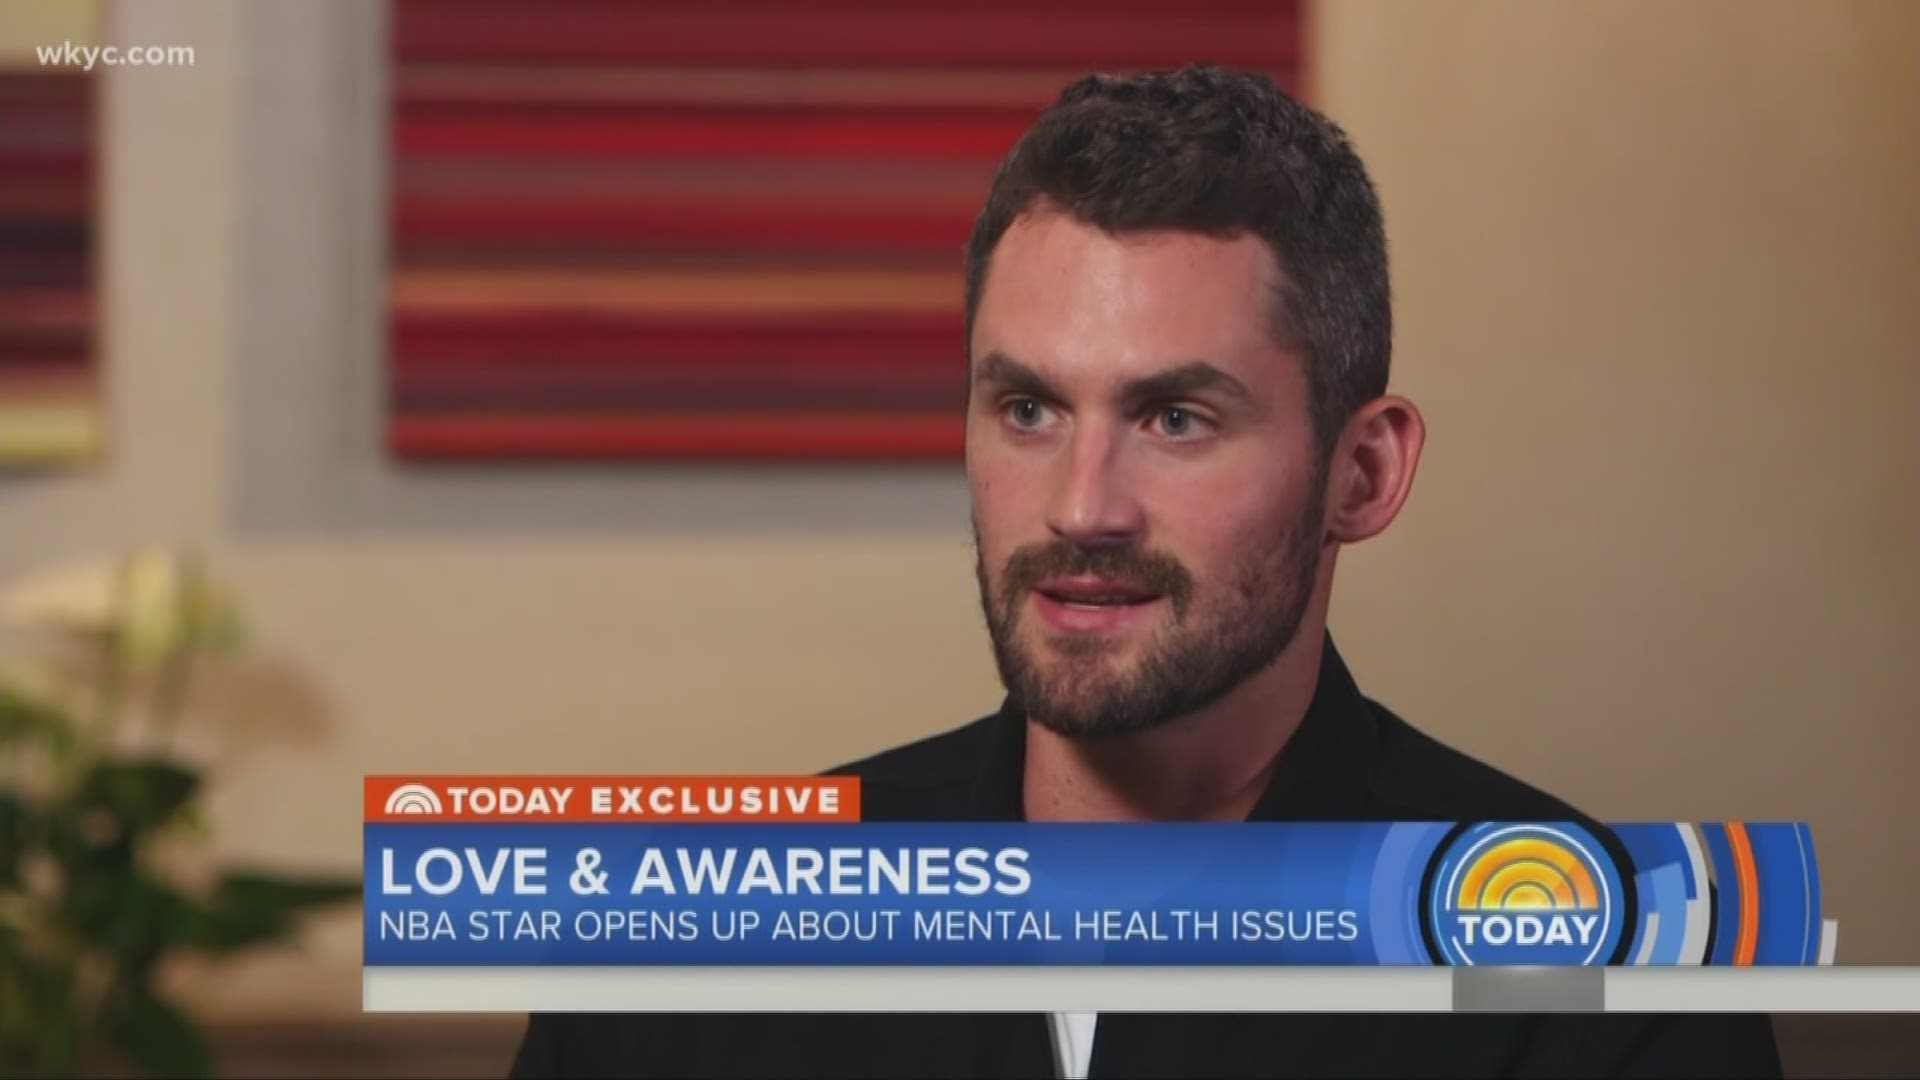 Cleveland Cavaliers' Kevin Love discusses mental health with Carson Daly on 'Today'